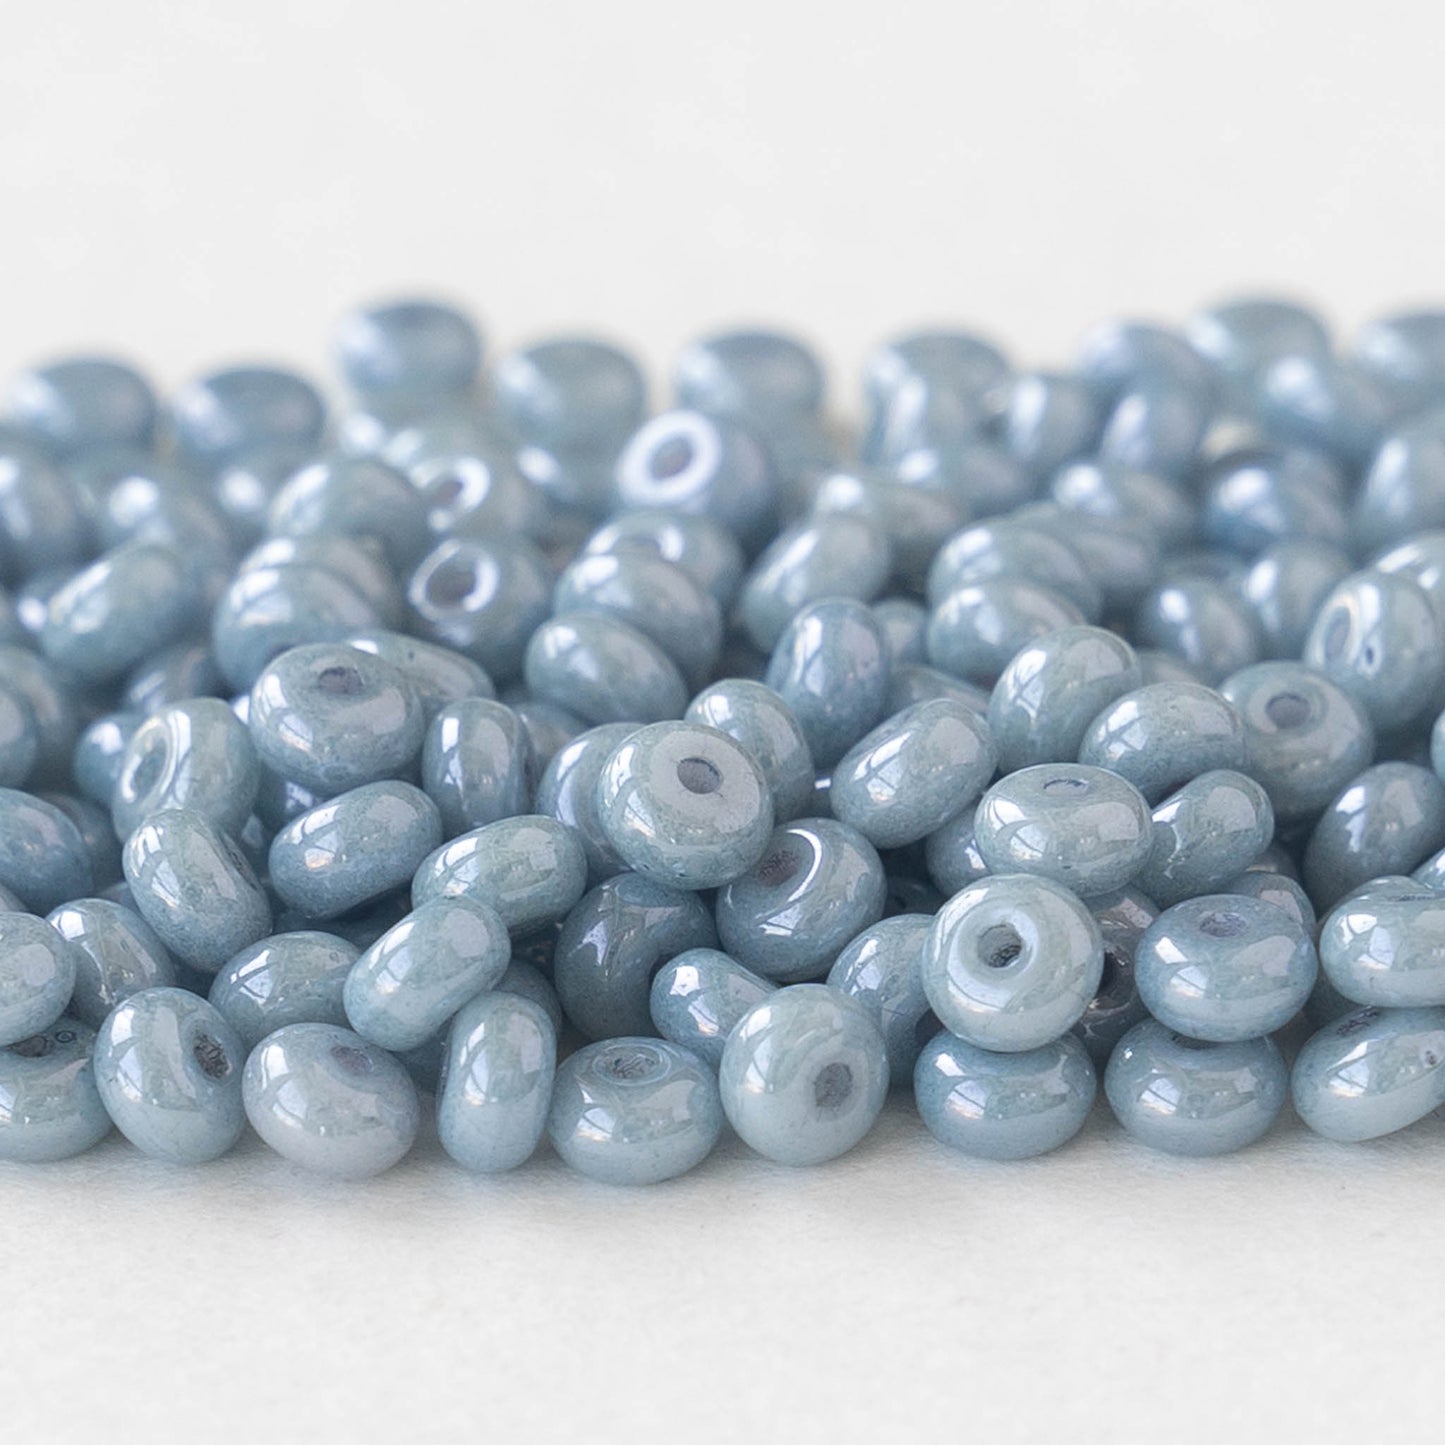 4mm Rondelle Beads - Pearly Blue Luster - 10 Grams